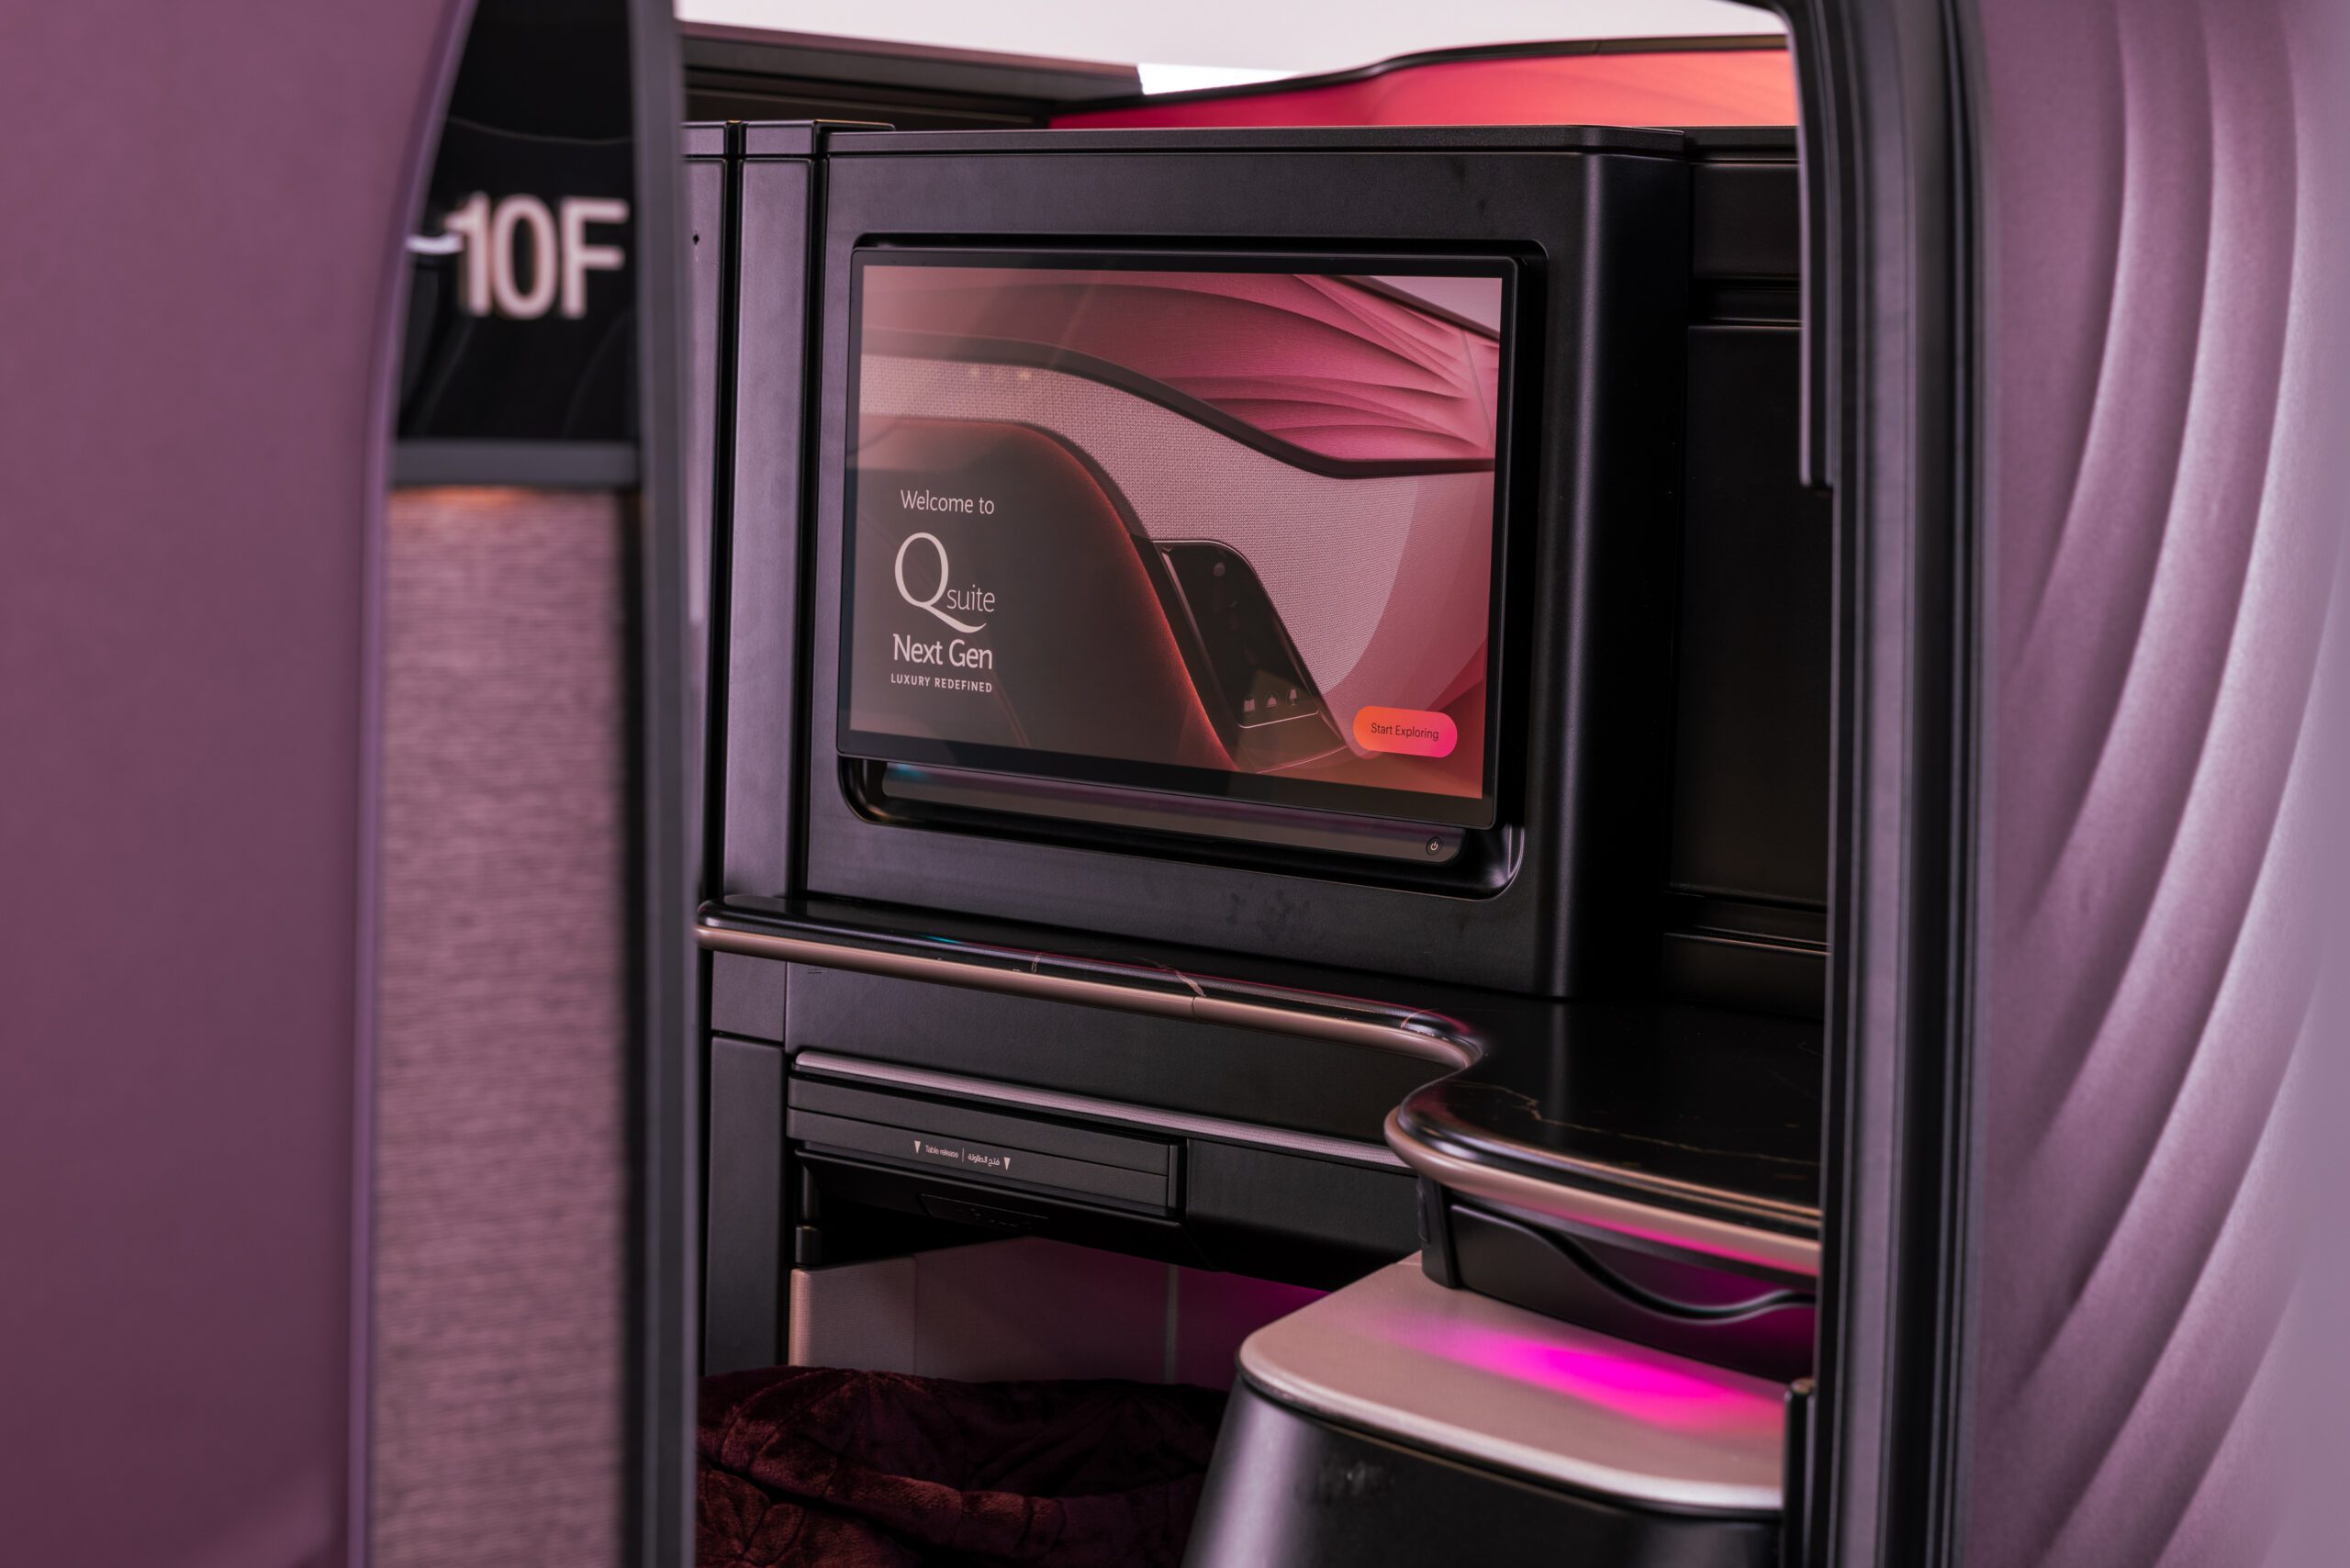 Qatar Airways Unveils its Newest Business Class Suites With Foldable TV Screens to Create New Social Spaces